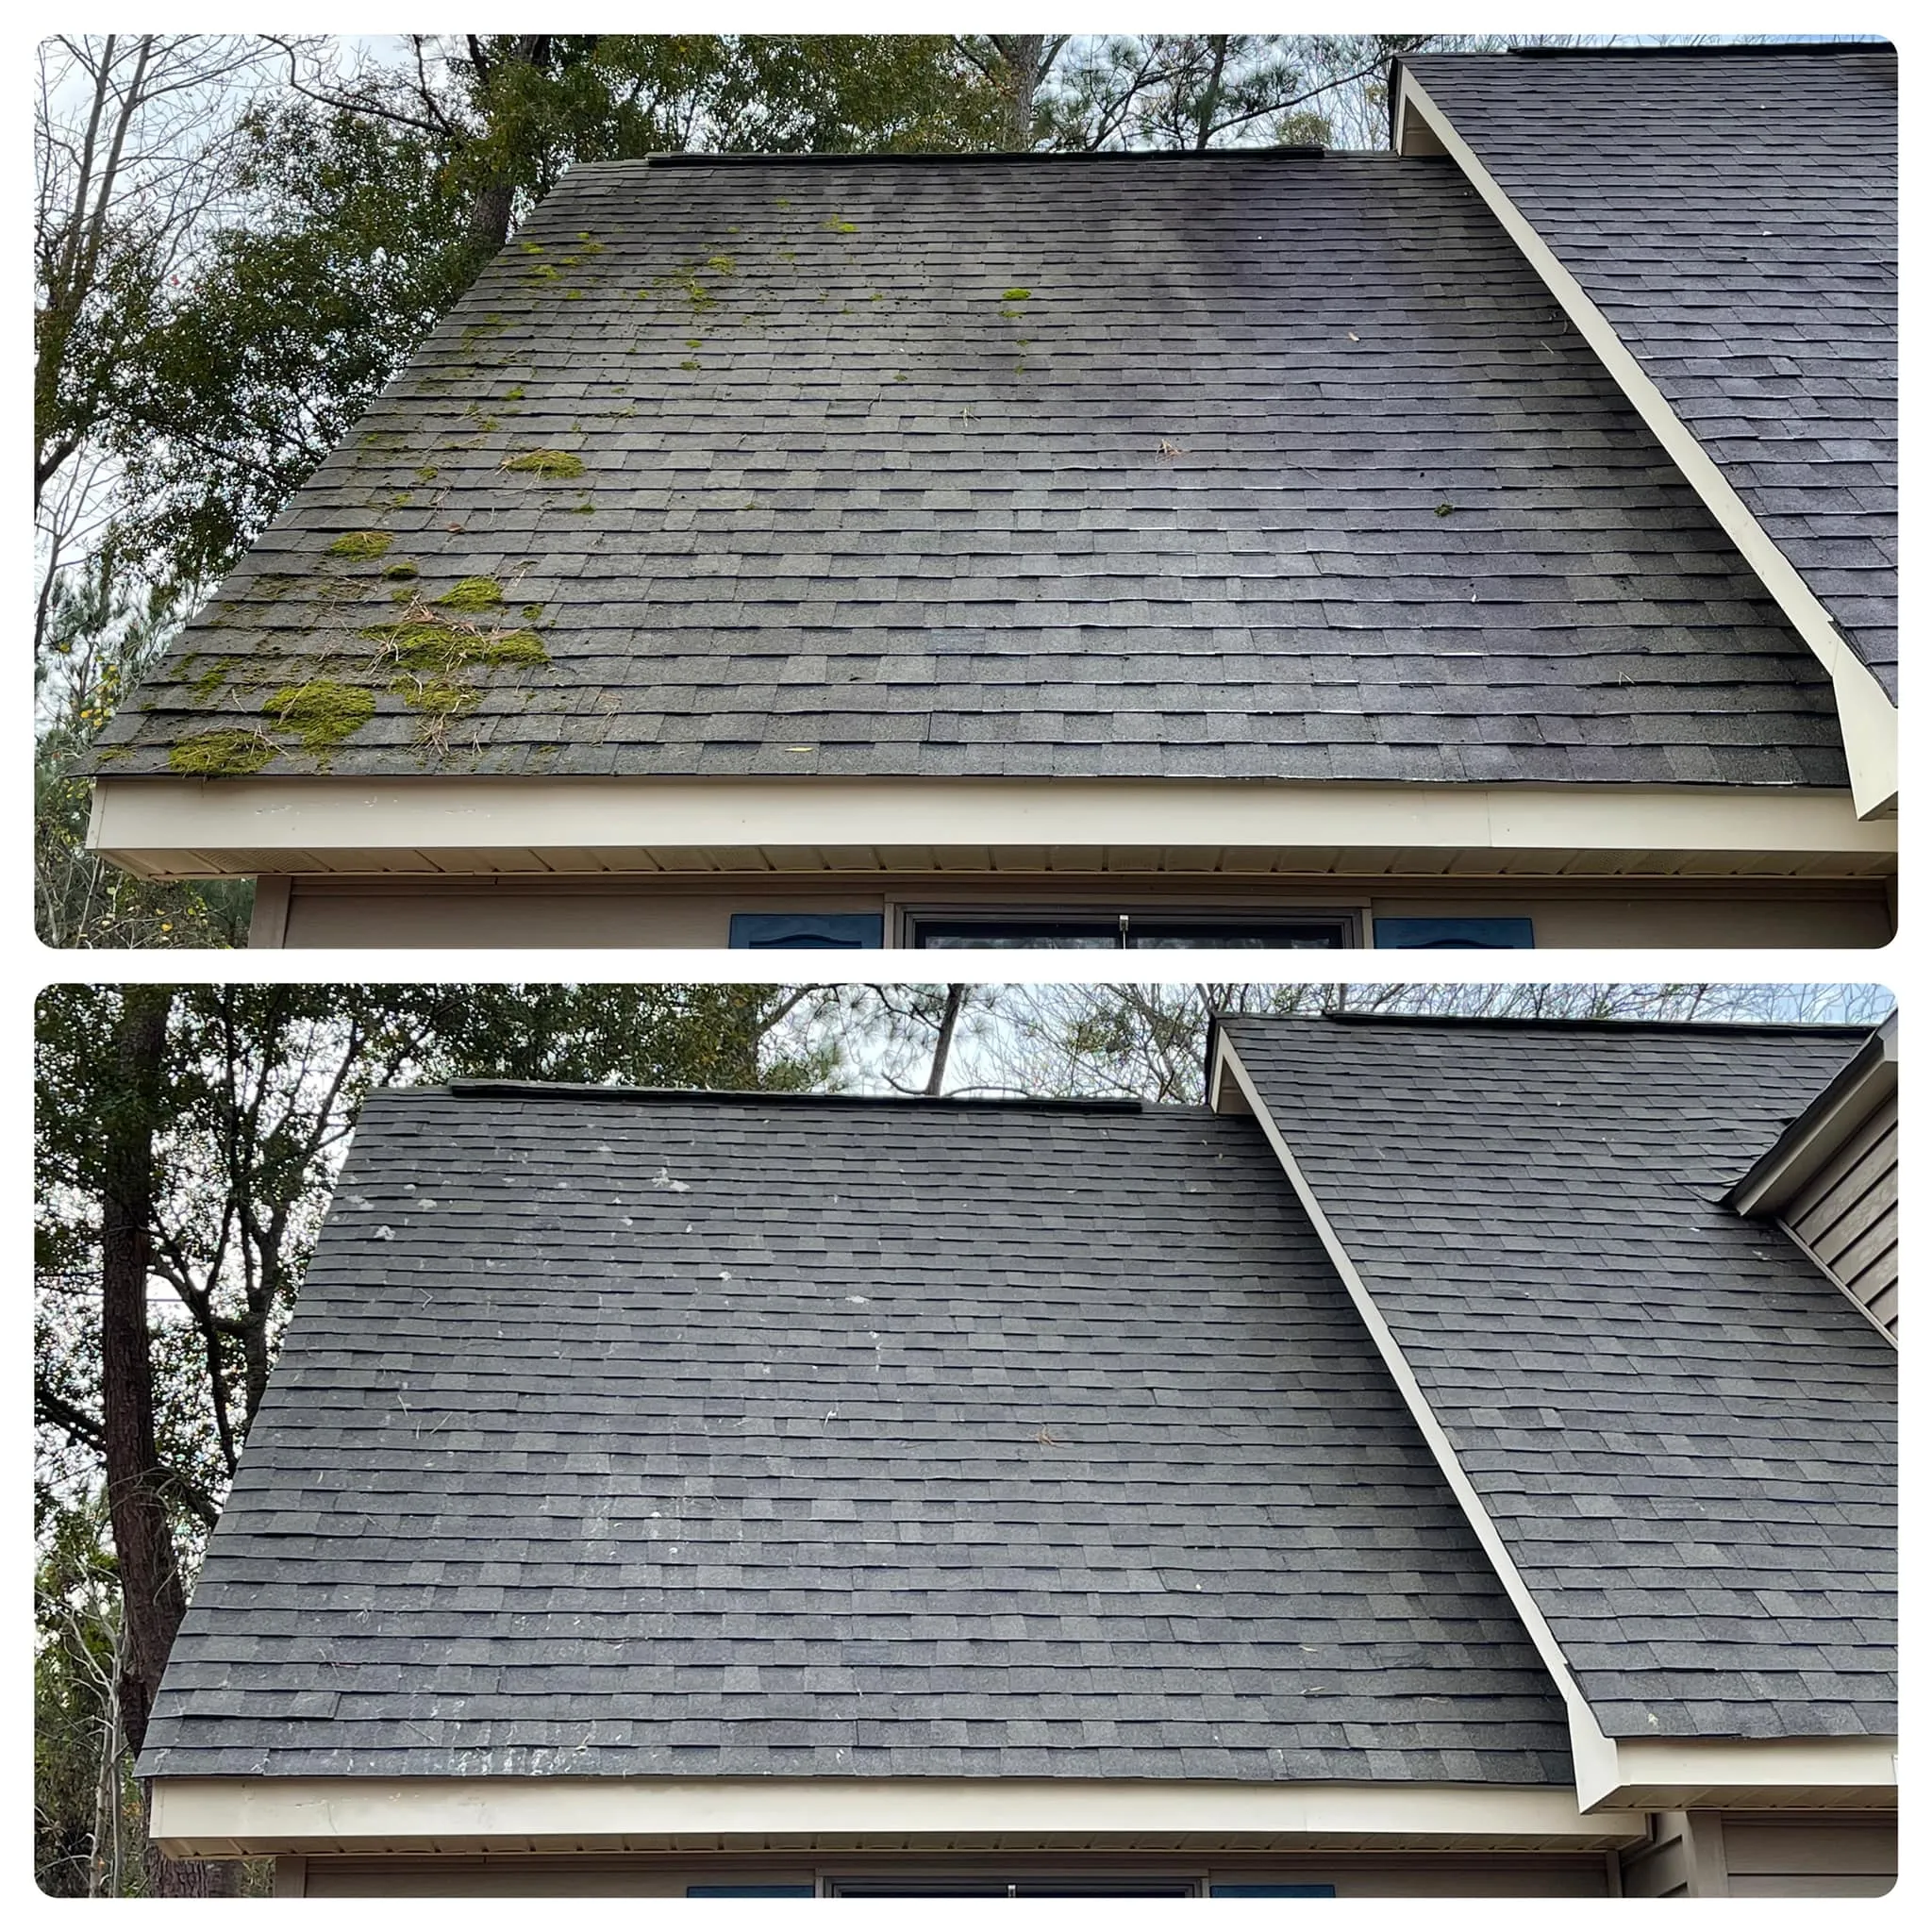 Roof for Sabre's Edge Pressure Washing in Greenville, NC